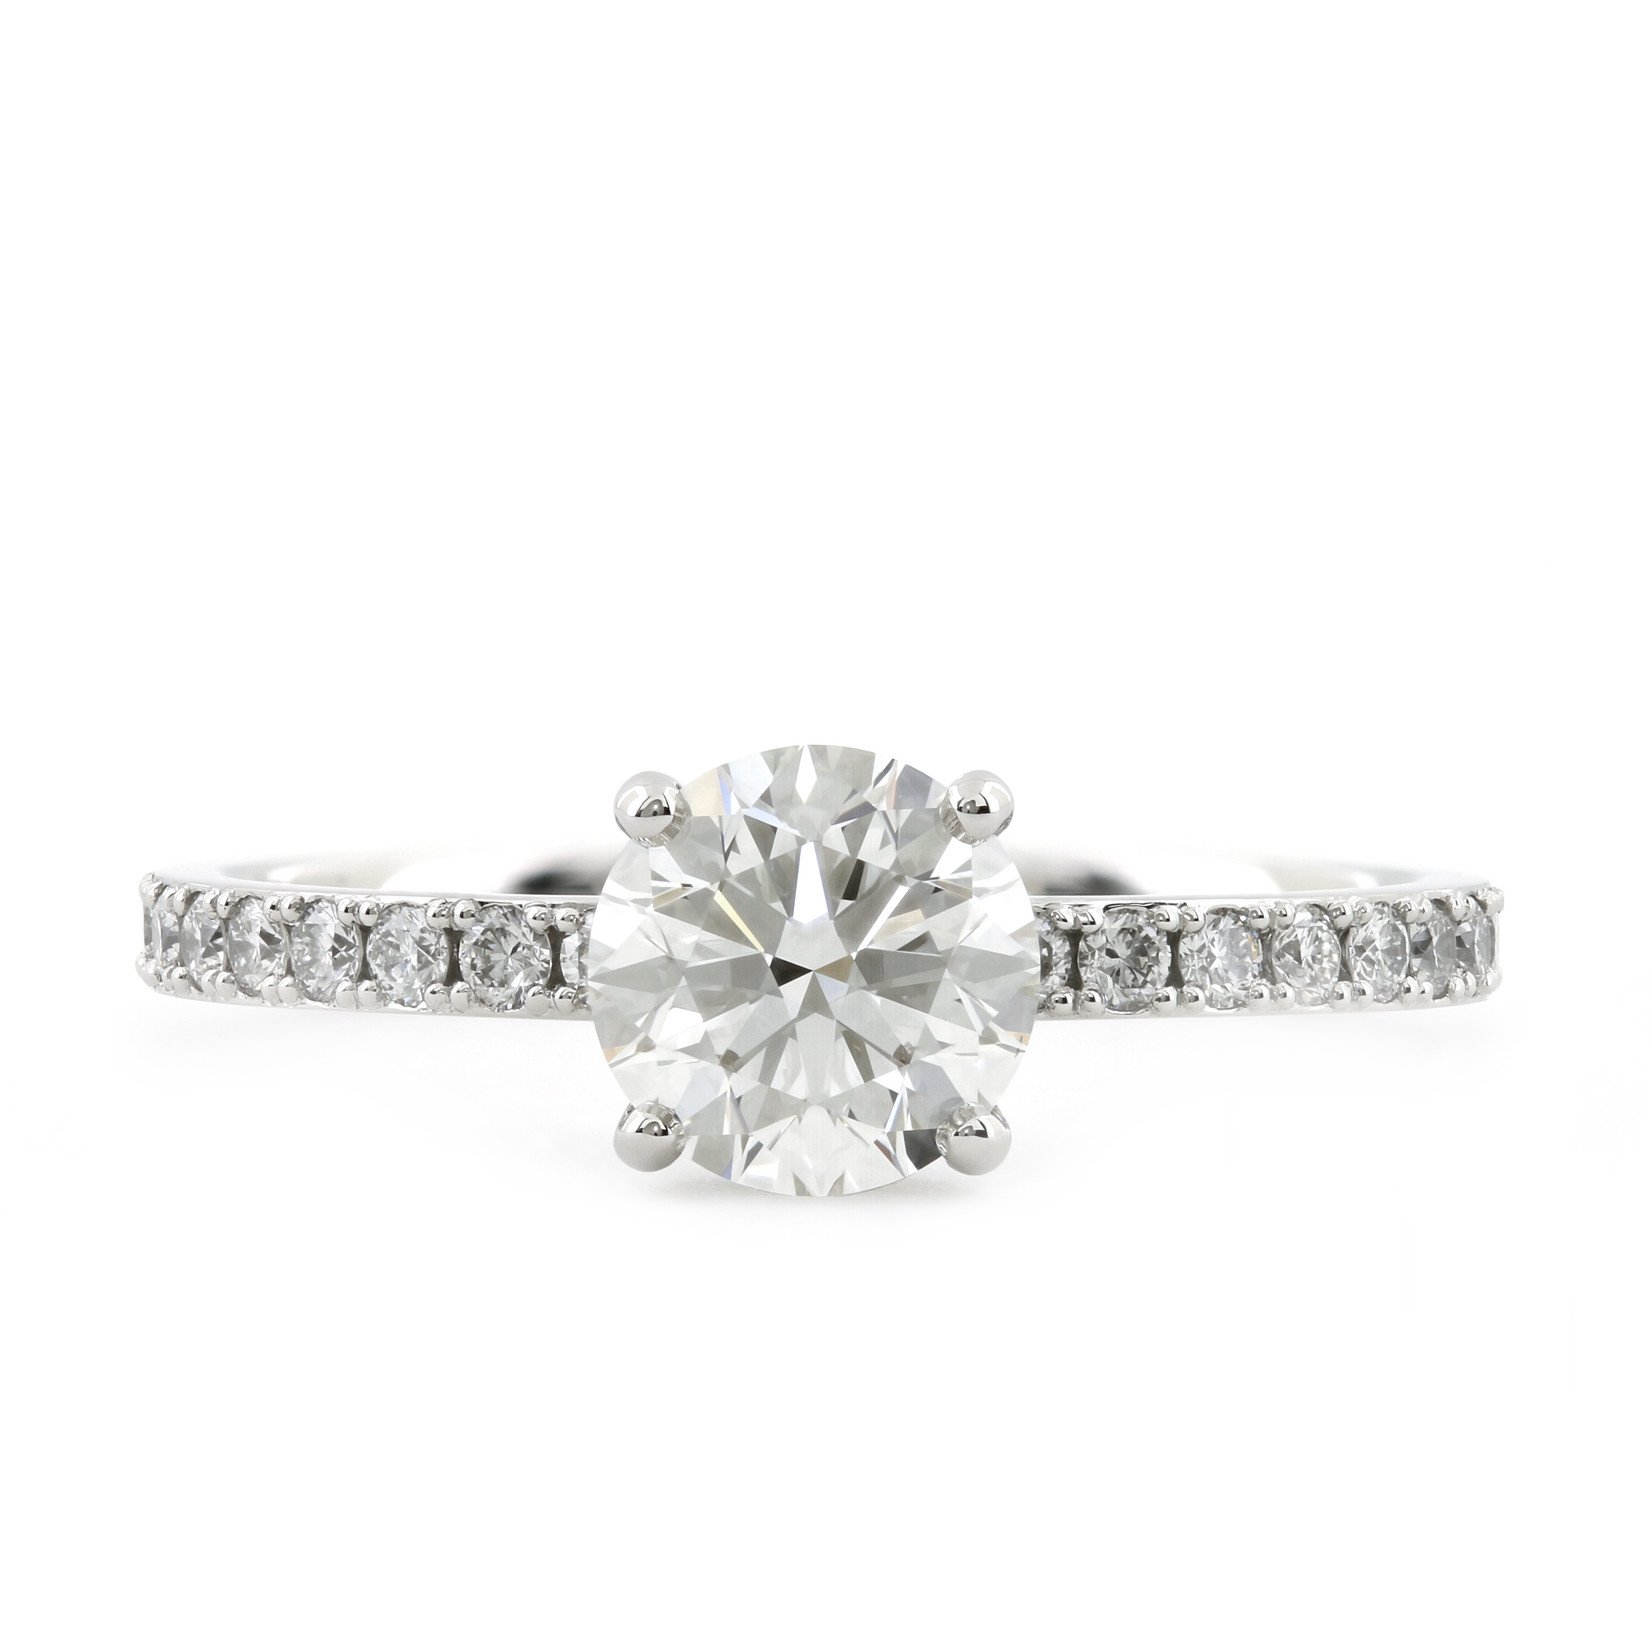 Baxter Moerman Grace Engagement Ring with Round 1.05ct Diamond